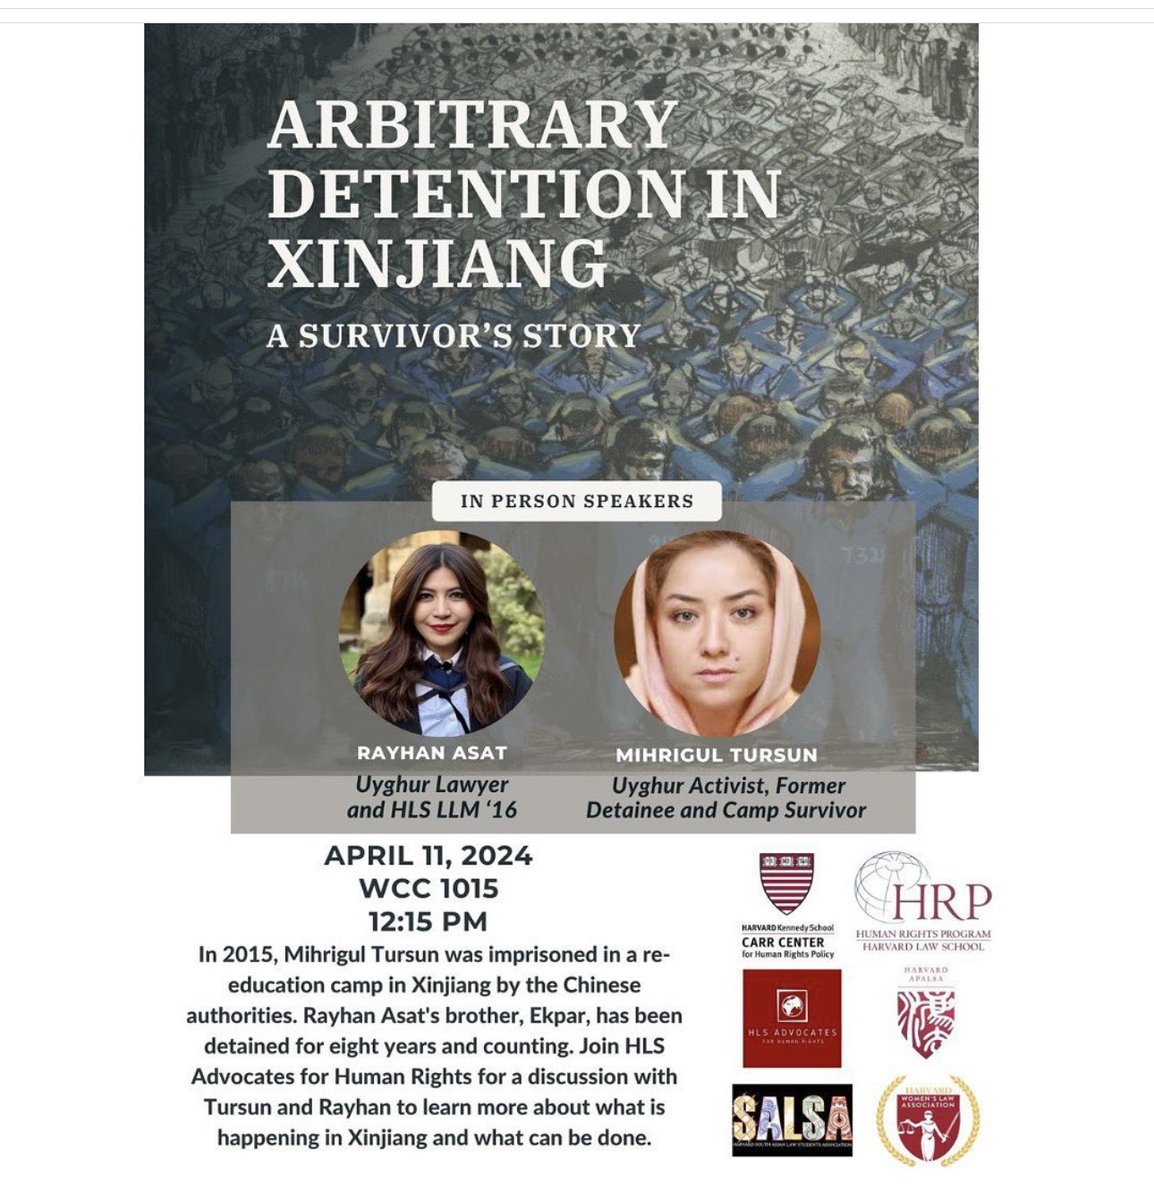 I’m honored to bring a true fighter and survivor, Mihrigul Tursun, to @Harvard_Law. The @Harvard community will hear from a woman who miraculously was able to leave the concentration camps and is now helping her community. Thanks for organizing HLS Advocates and the sponsors.